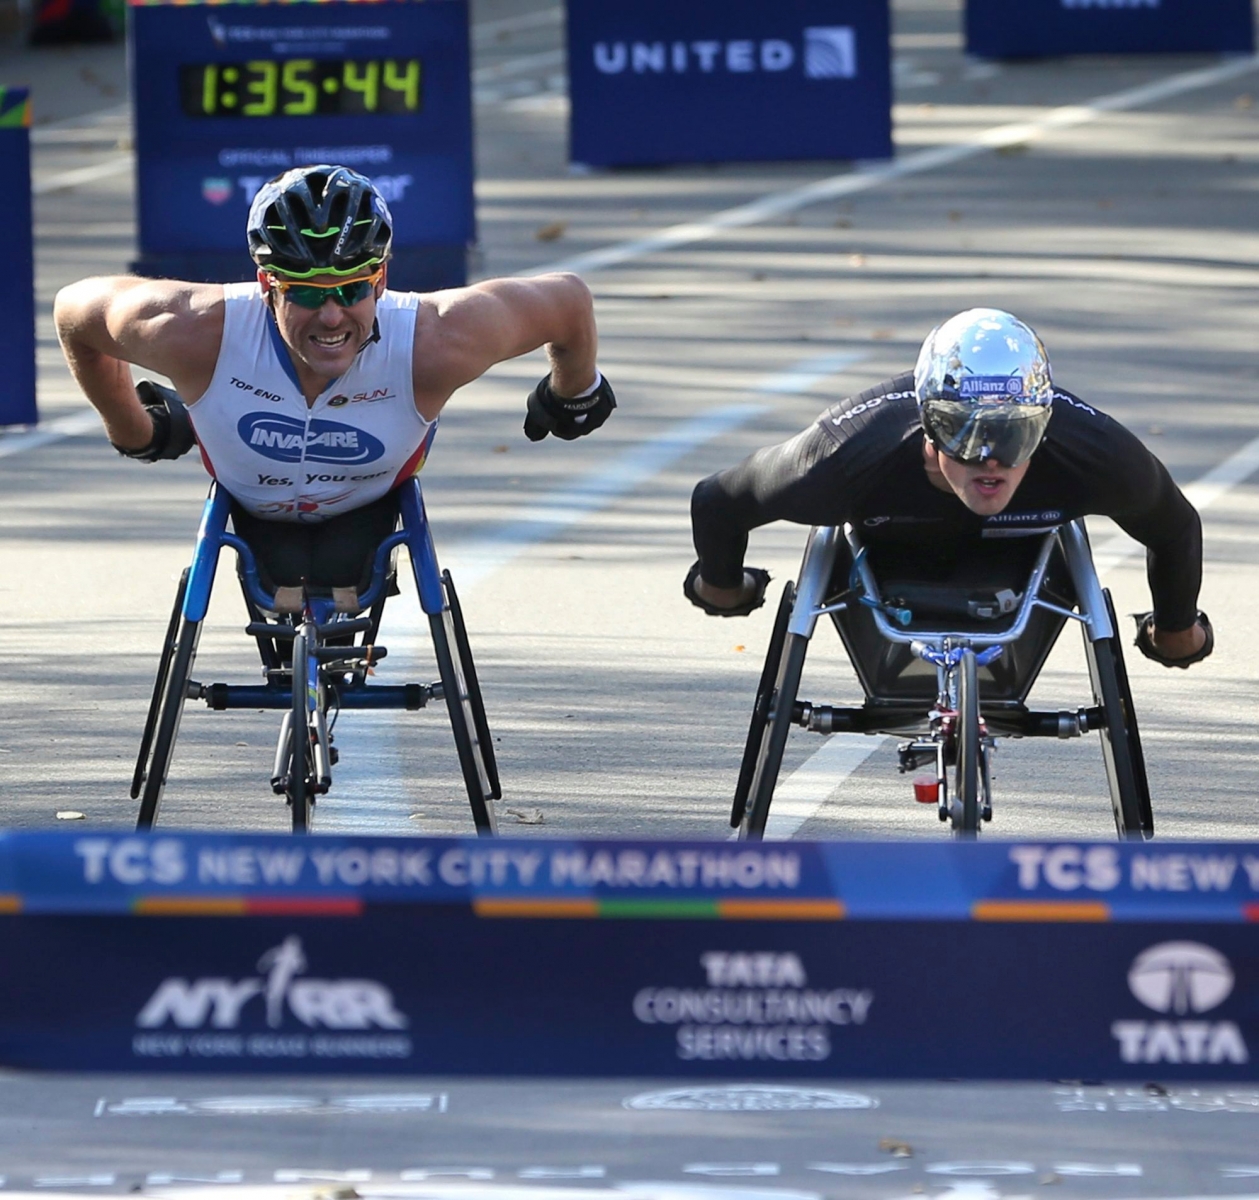 Marcel Hug of Switzerland, right, races to the finish line just ahead of Kurt Fearnley of Australia, in the men's wheelchair division of the 2016 New York City Marathon in New York, Sunday, Nov. 6, 2016. (AP Photo/Seth Wenig) NYC Marathon